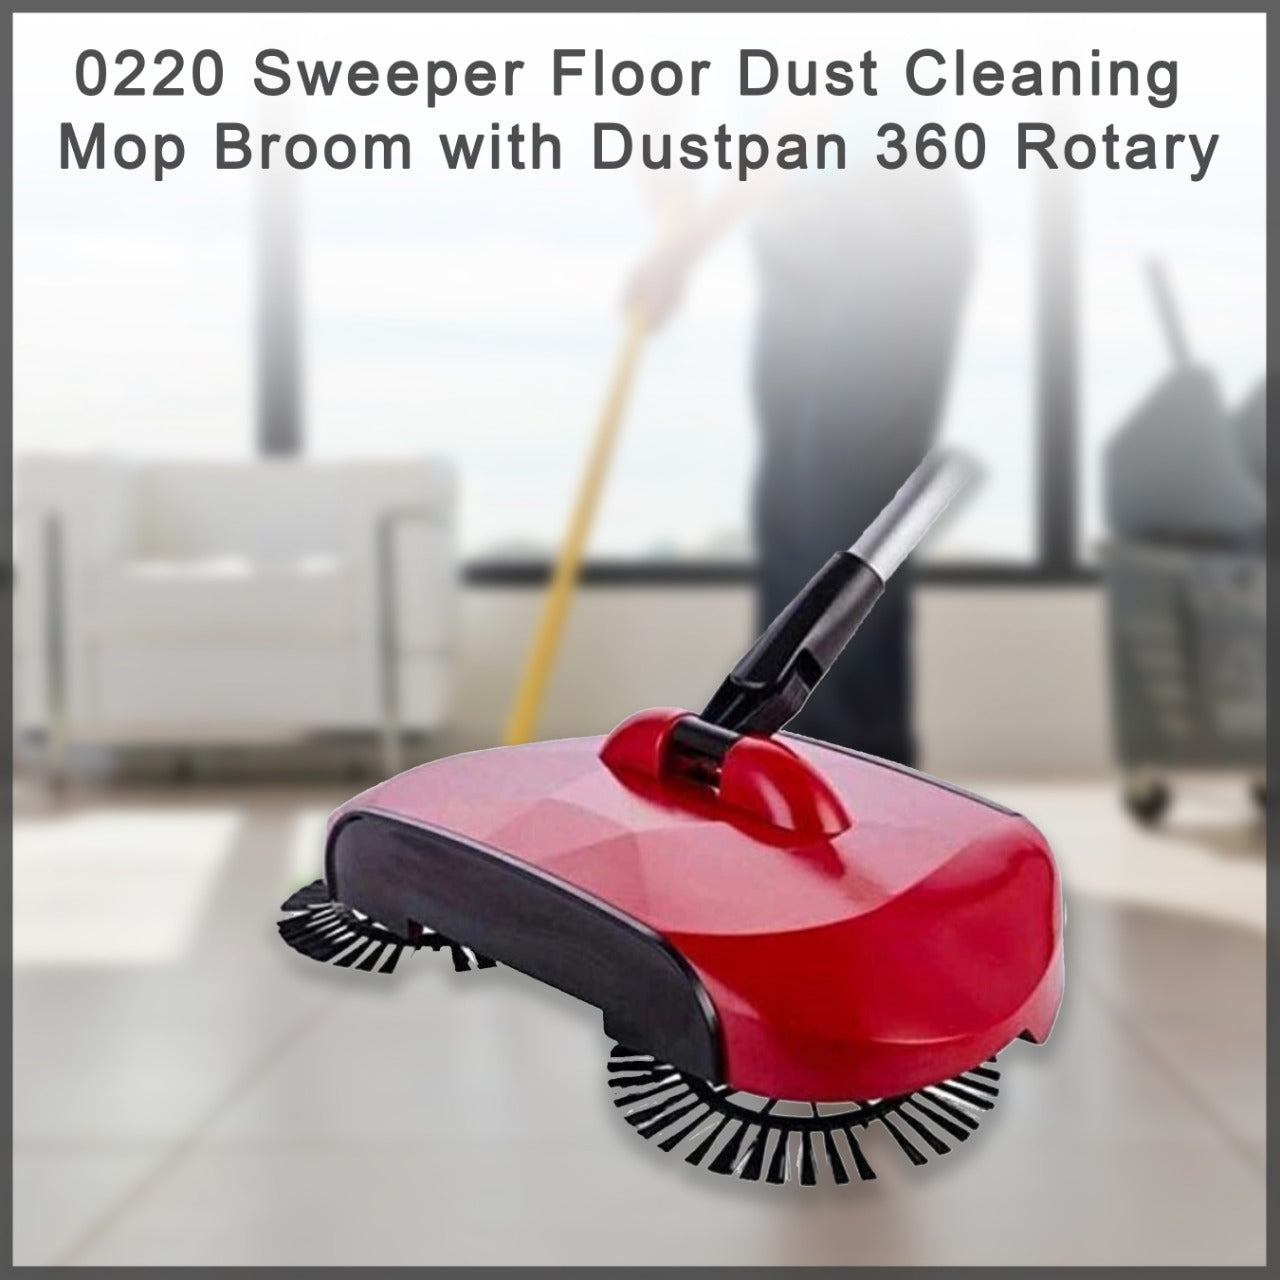 220 Sweeper Floor Dust Cleaning Mop Broom with Dustpan 360 Rotary DeoDap